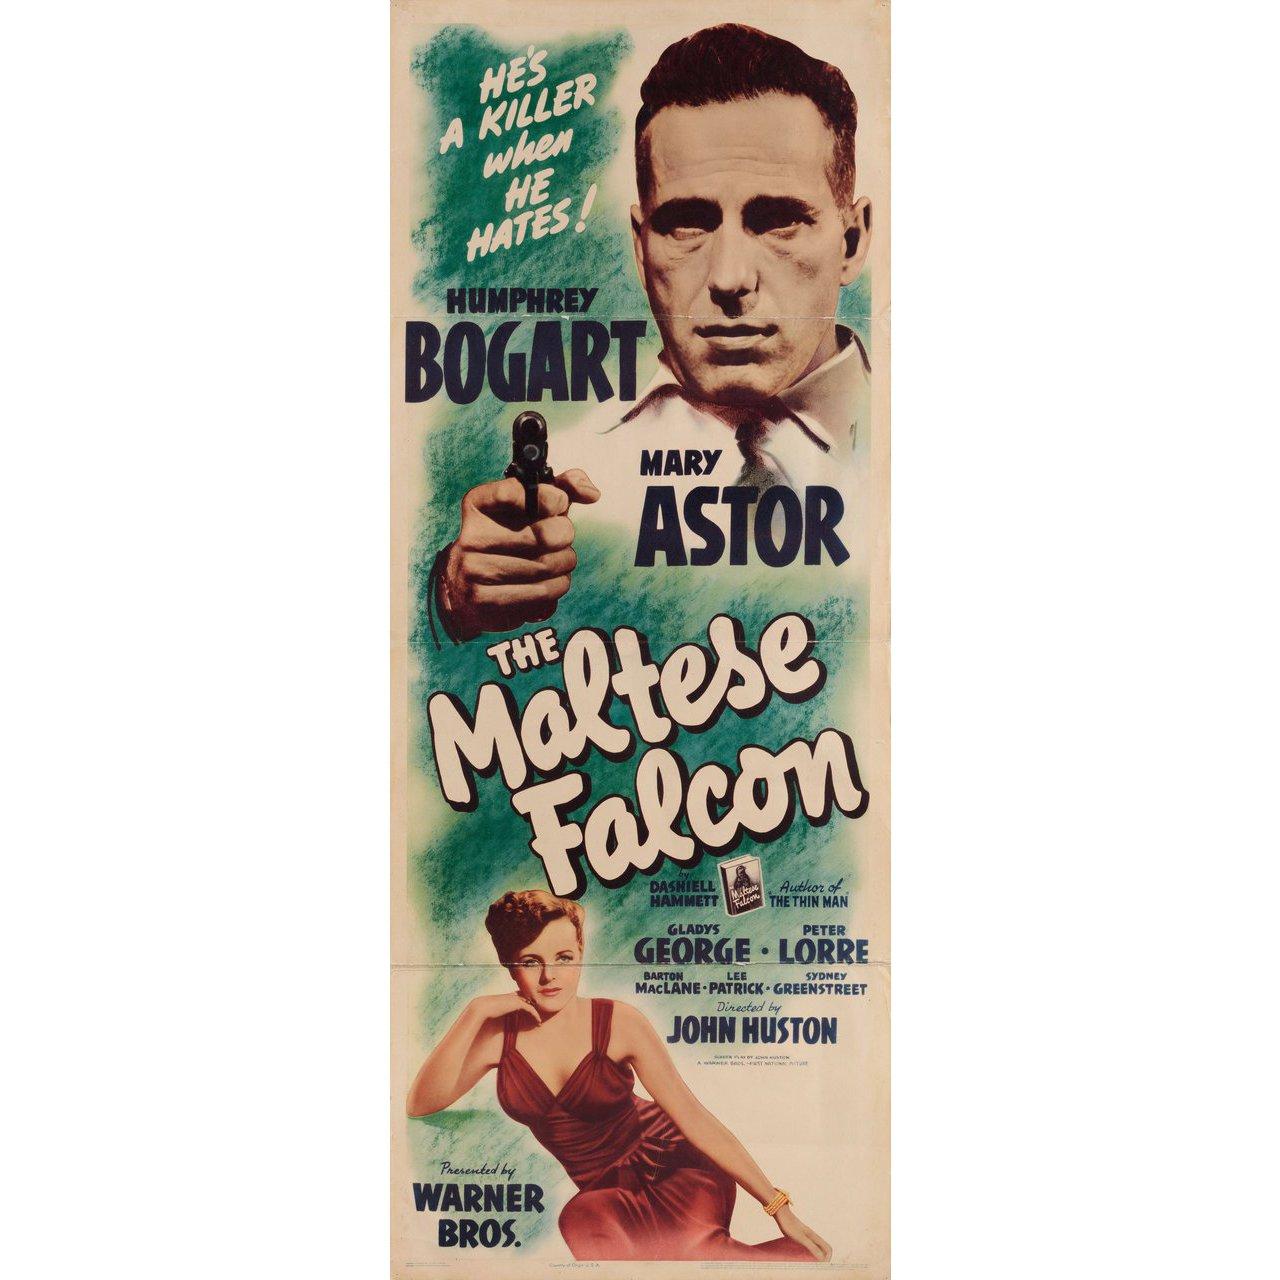 Original 1941 U.S. insert poster for the film The Maltese Falcon directed by John Huston with Humphrey Bogart / Mary Astor / Gladys George / Peter Lorre. Very Good-Fine condition, folded. Many original posters were issued folded or were subsequently